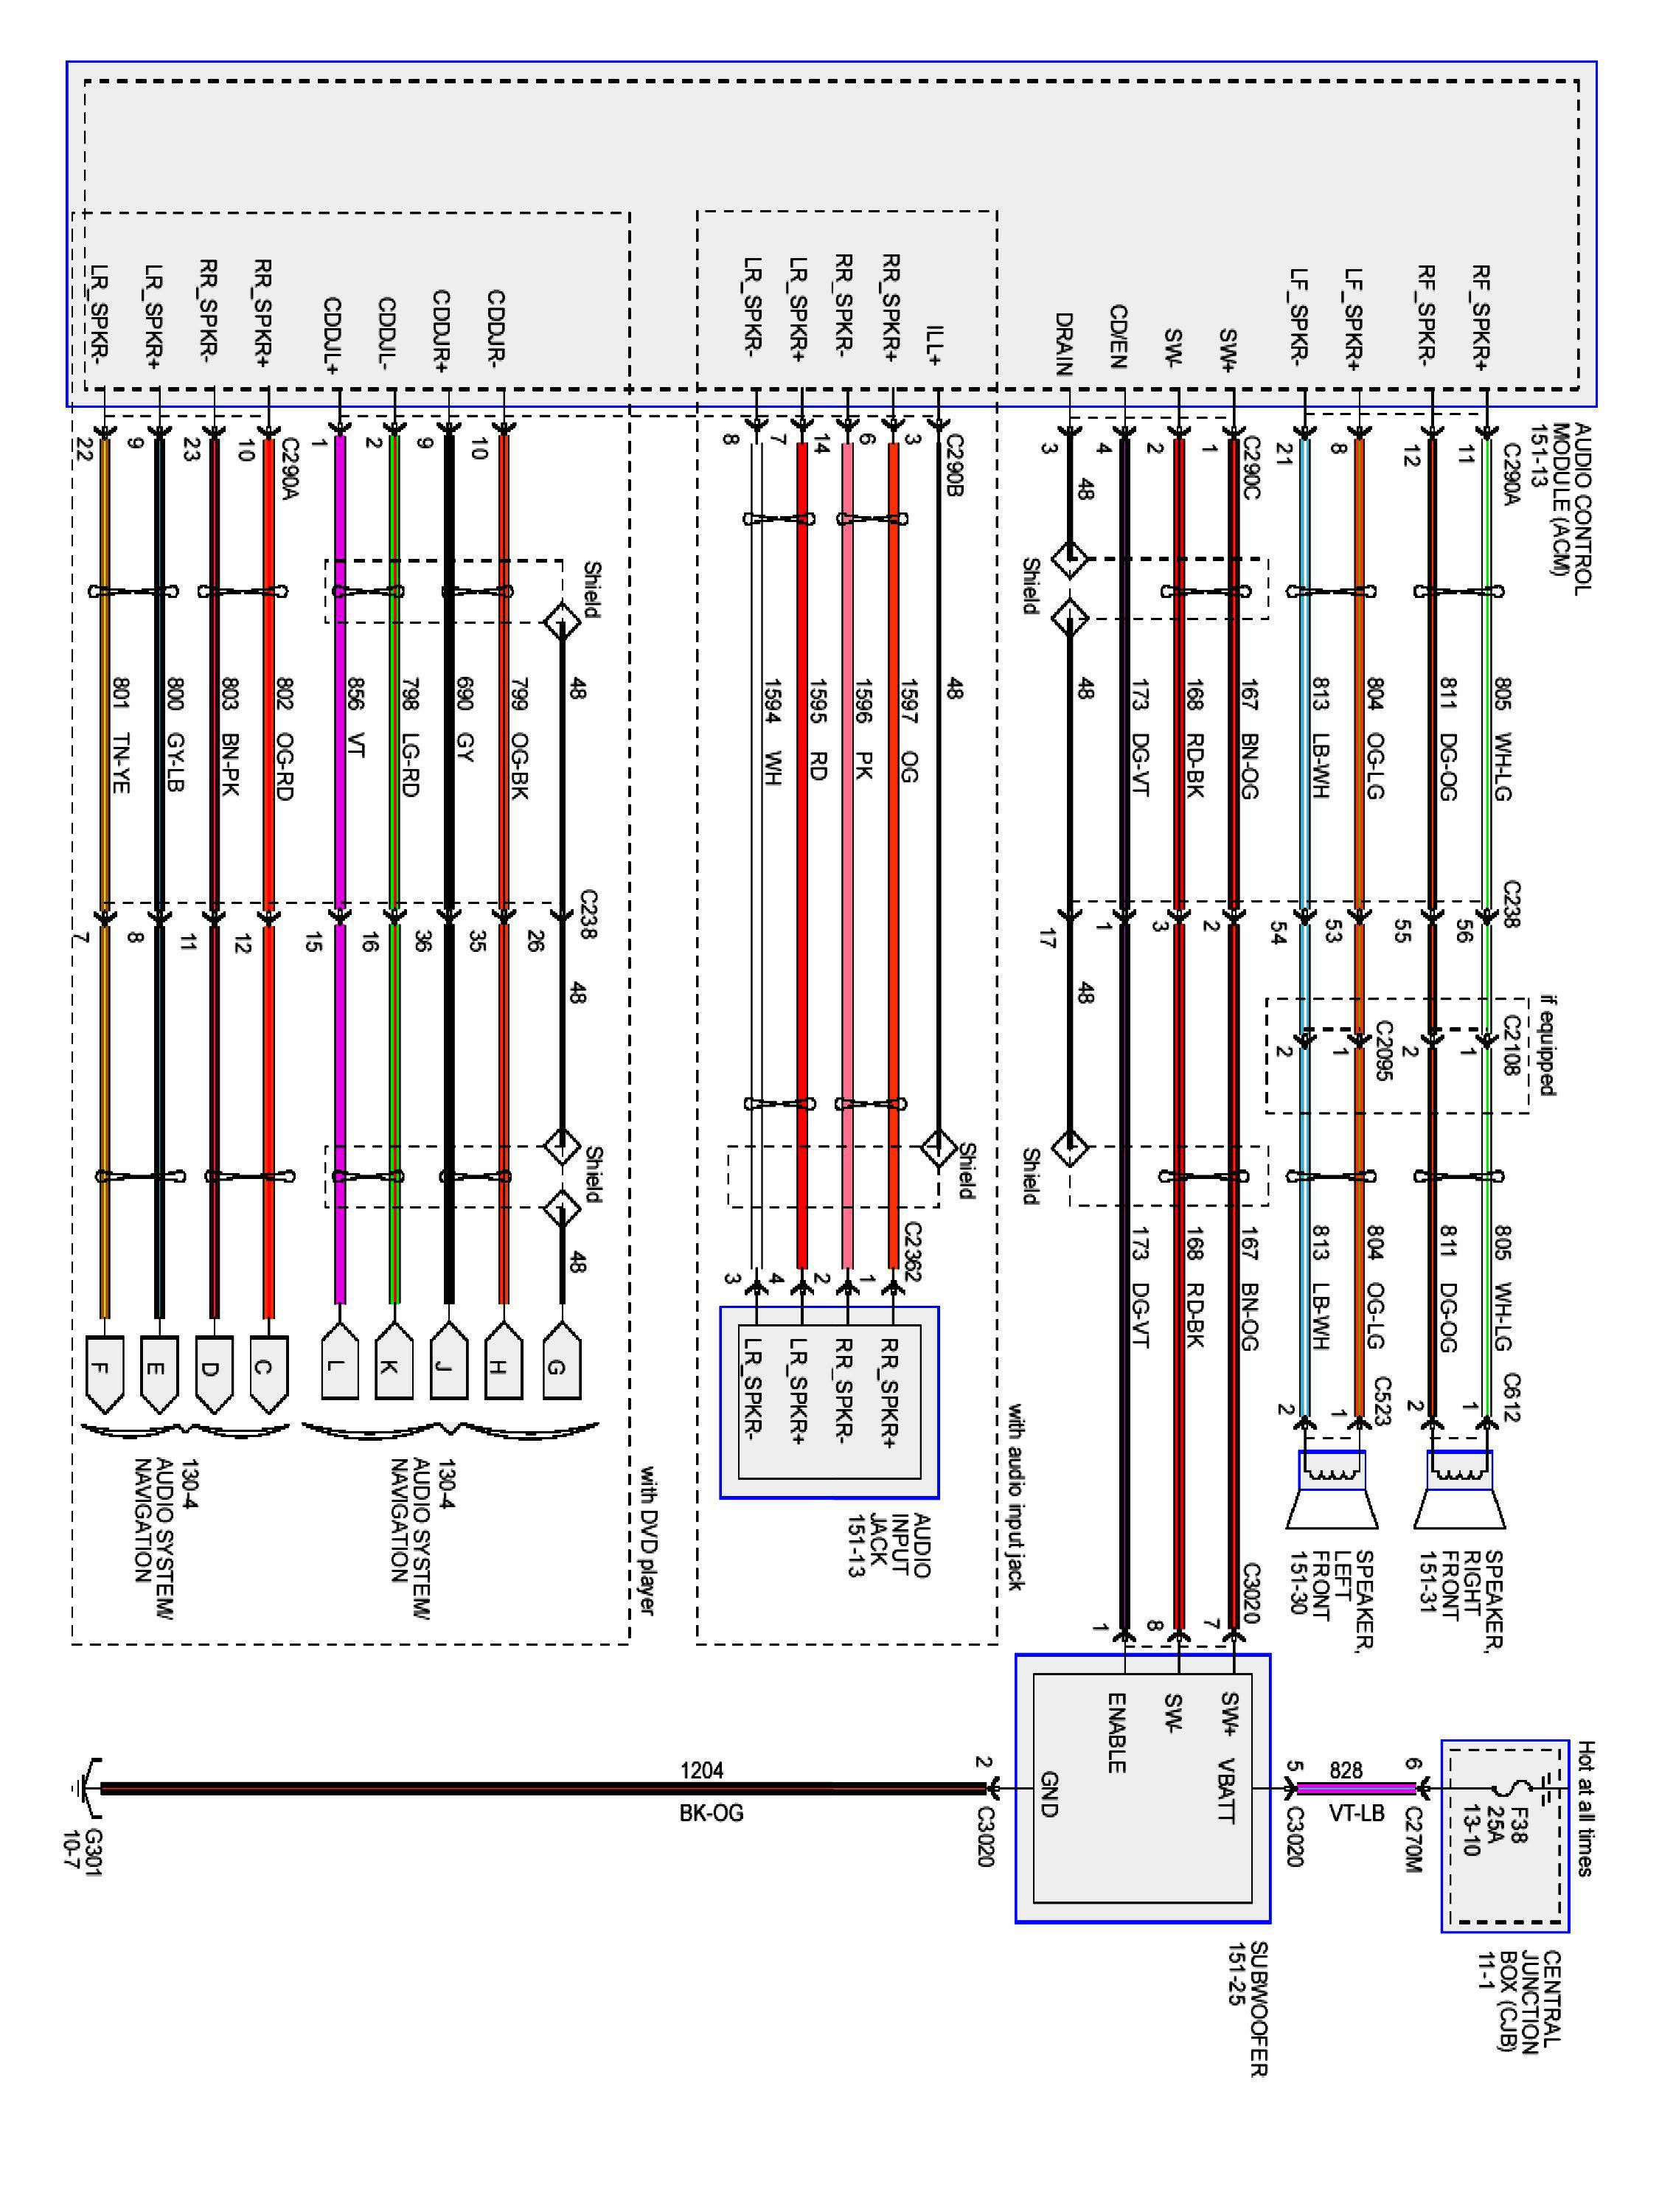 2005 ford expedition wiring schematic get wiring diagram mix 2005 ford expedition wiring schematic premium wiring ford expedition trailer